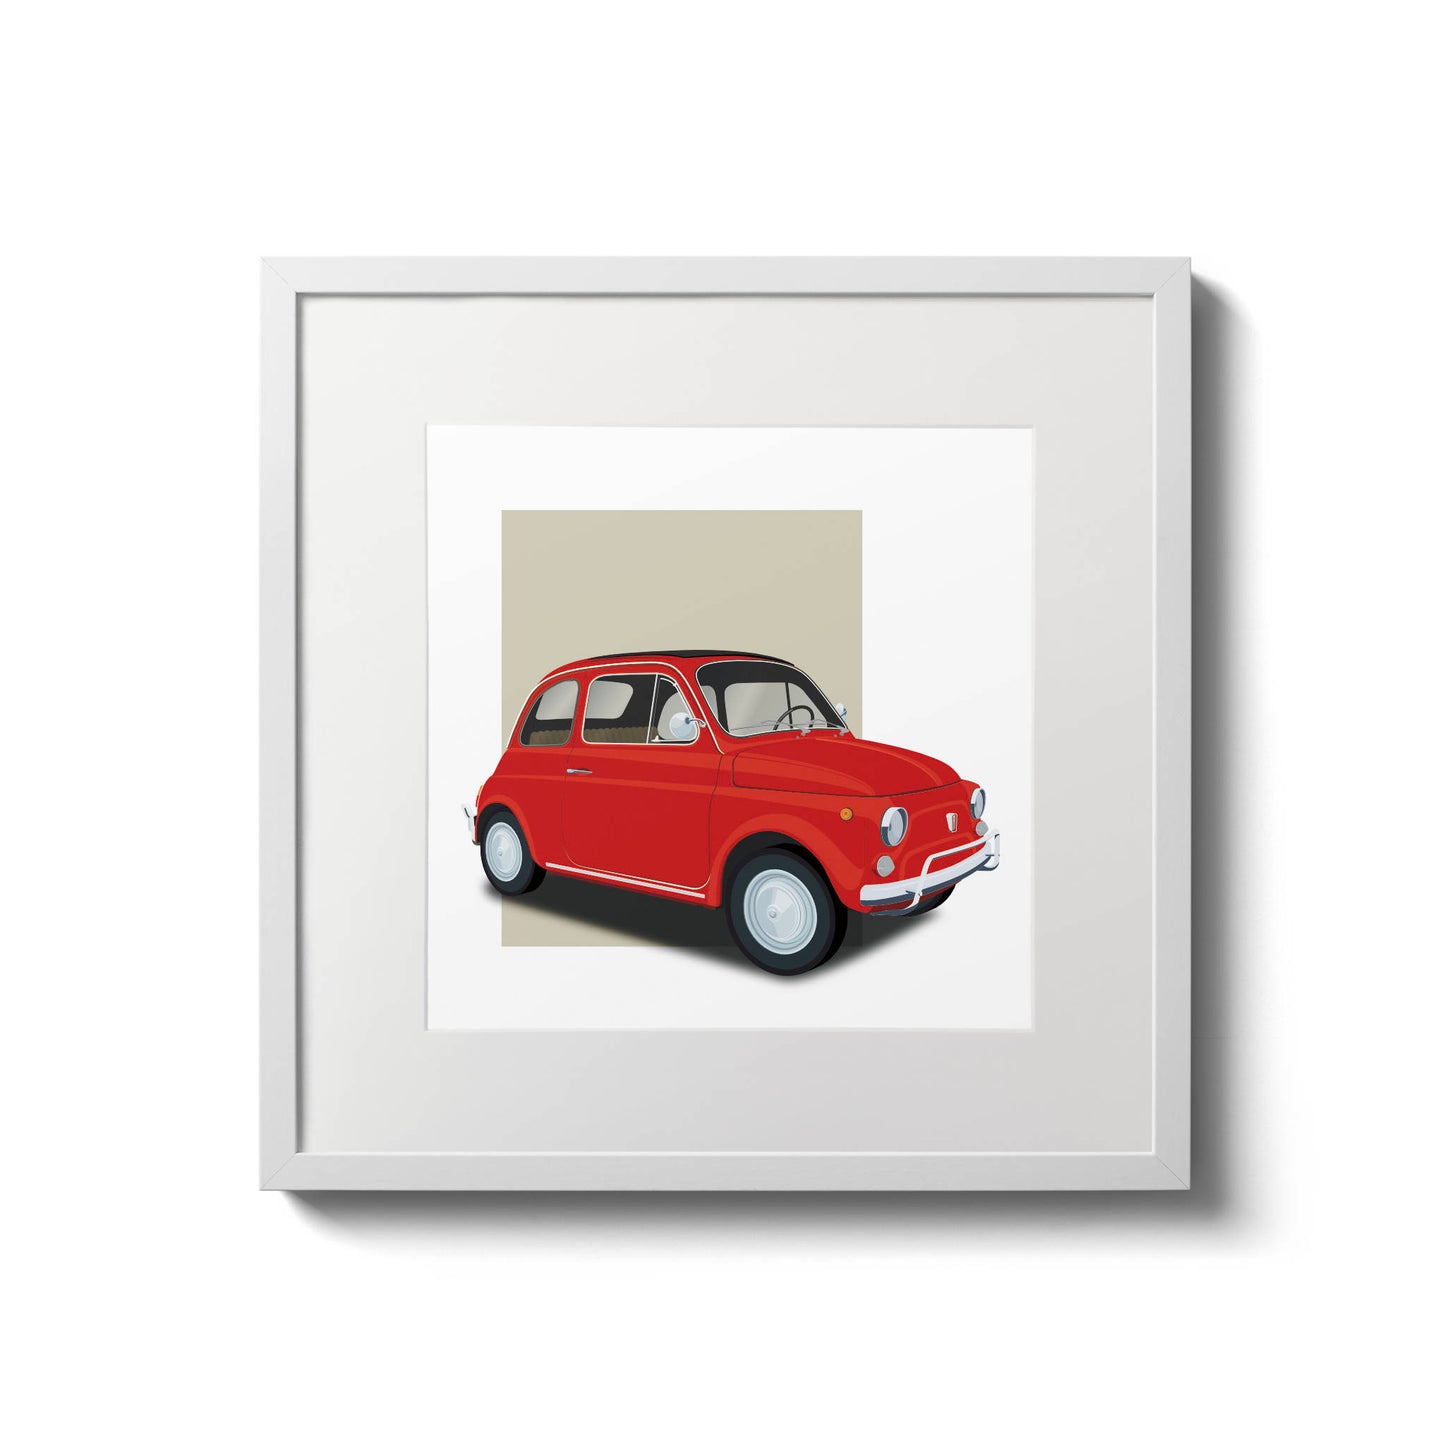 Modern illustration of the classic 1960s Fiat 500 Cinquecento in a gorgeous red colour with dark background, measuring 20 x 20cm